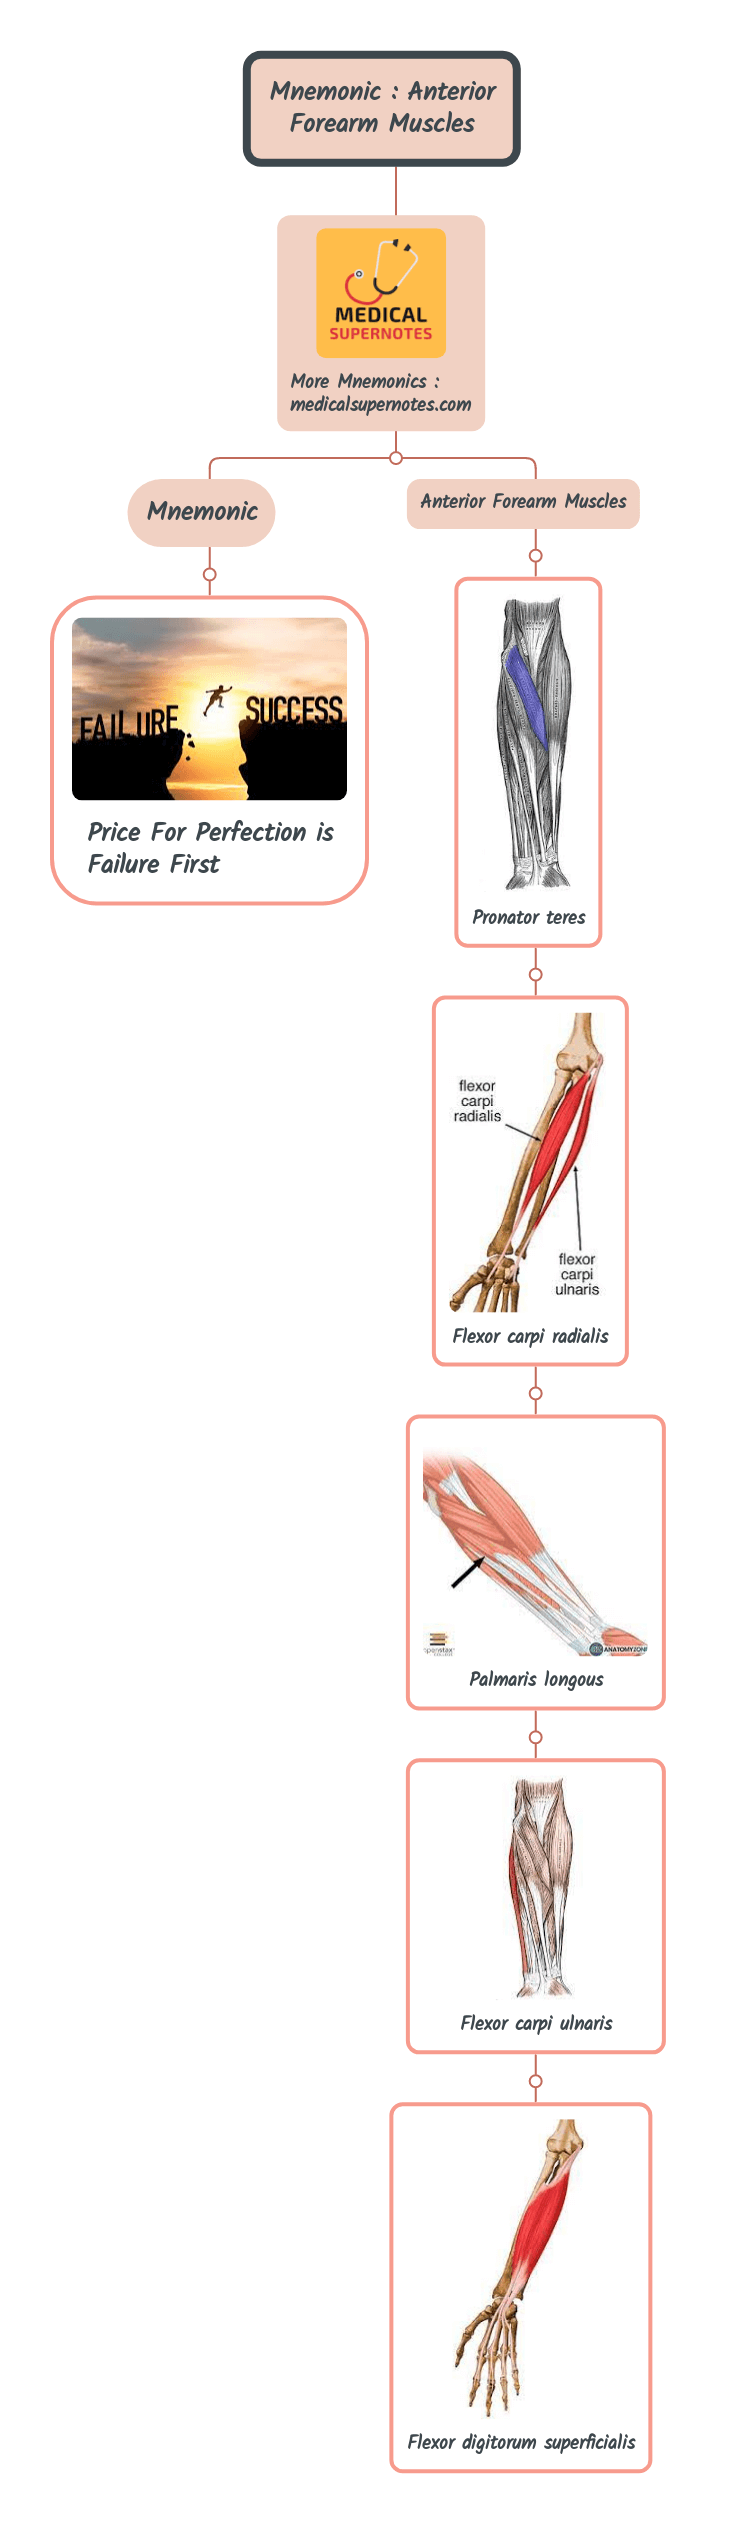 Mnemonic _ Anterior Forearm Muscles